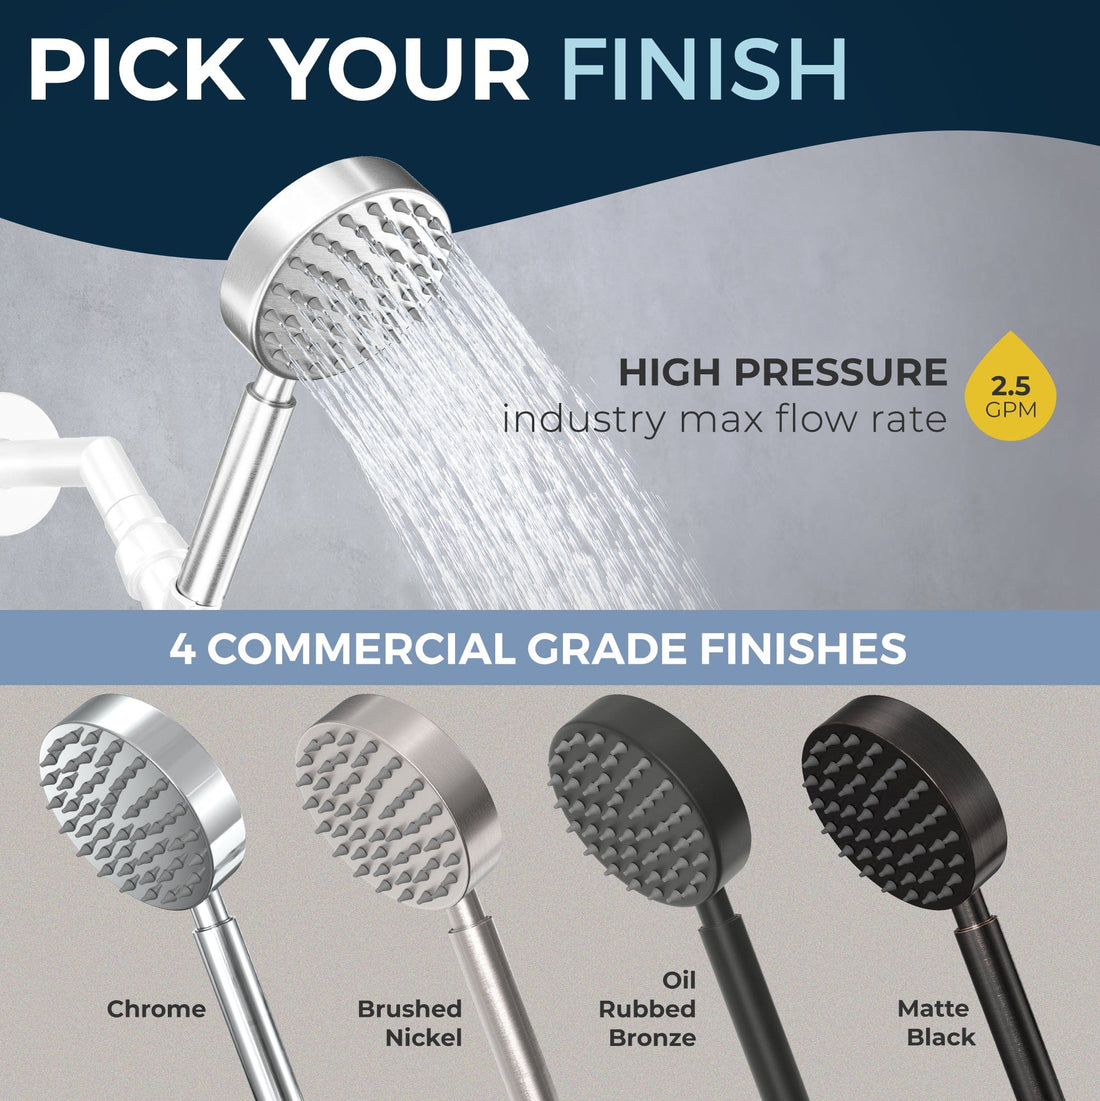 Pick Your Finish All Metal 1-Spray Handshower Chrome / 2.5 - The Shower Head Store